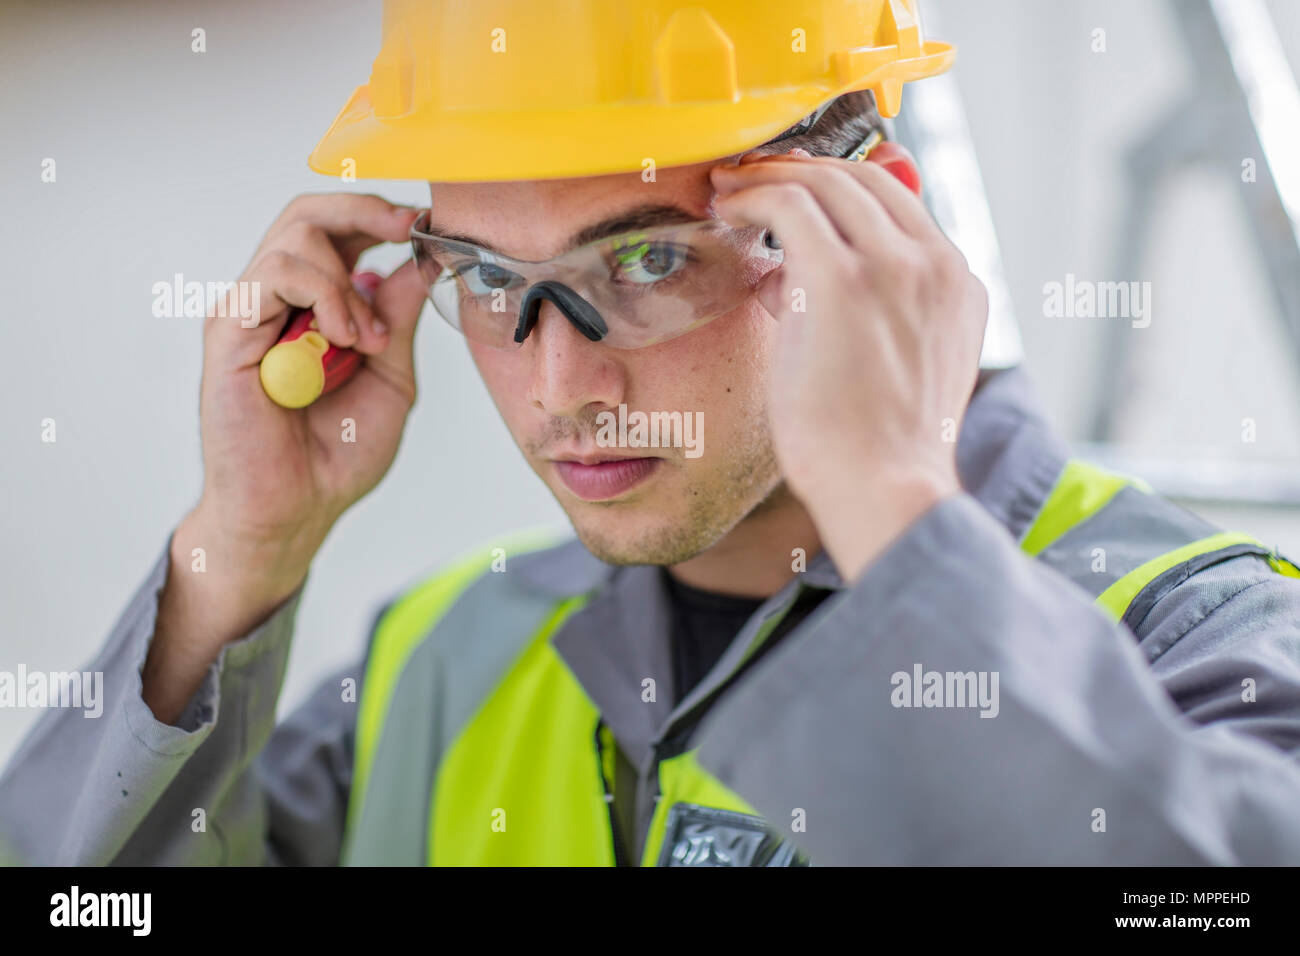 Electrician putting on protective glasses Stock Photo